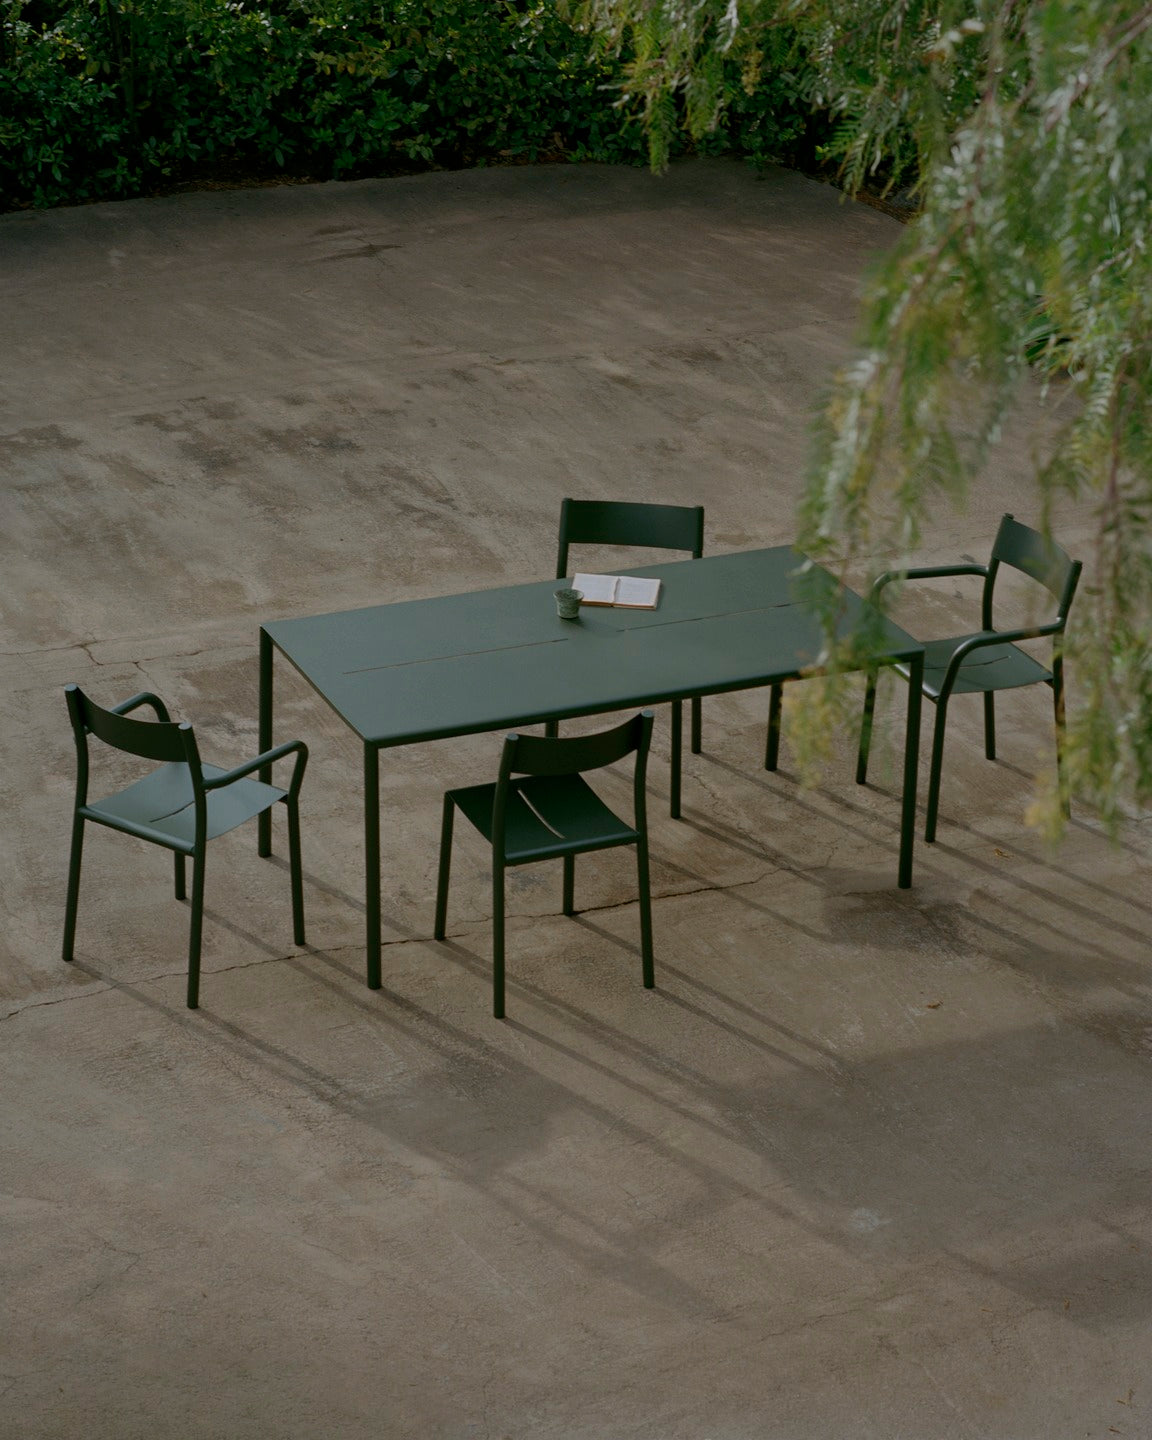 New works may table and chairs with and without armrests in dark green outside with tree